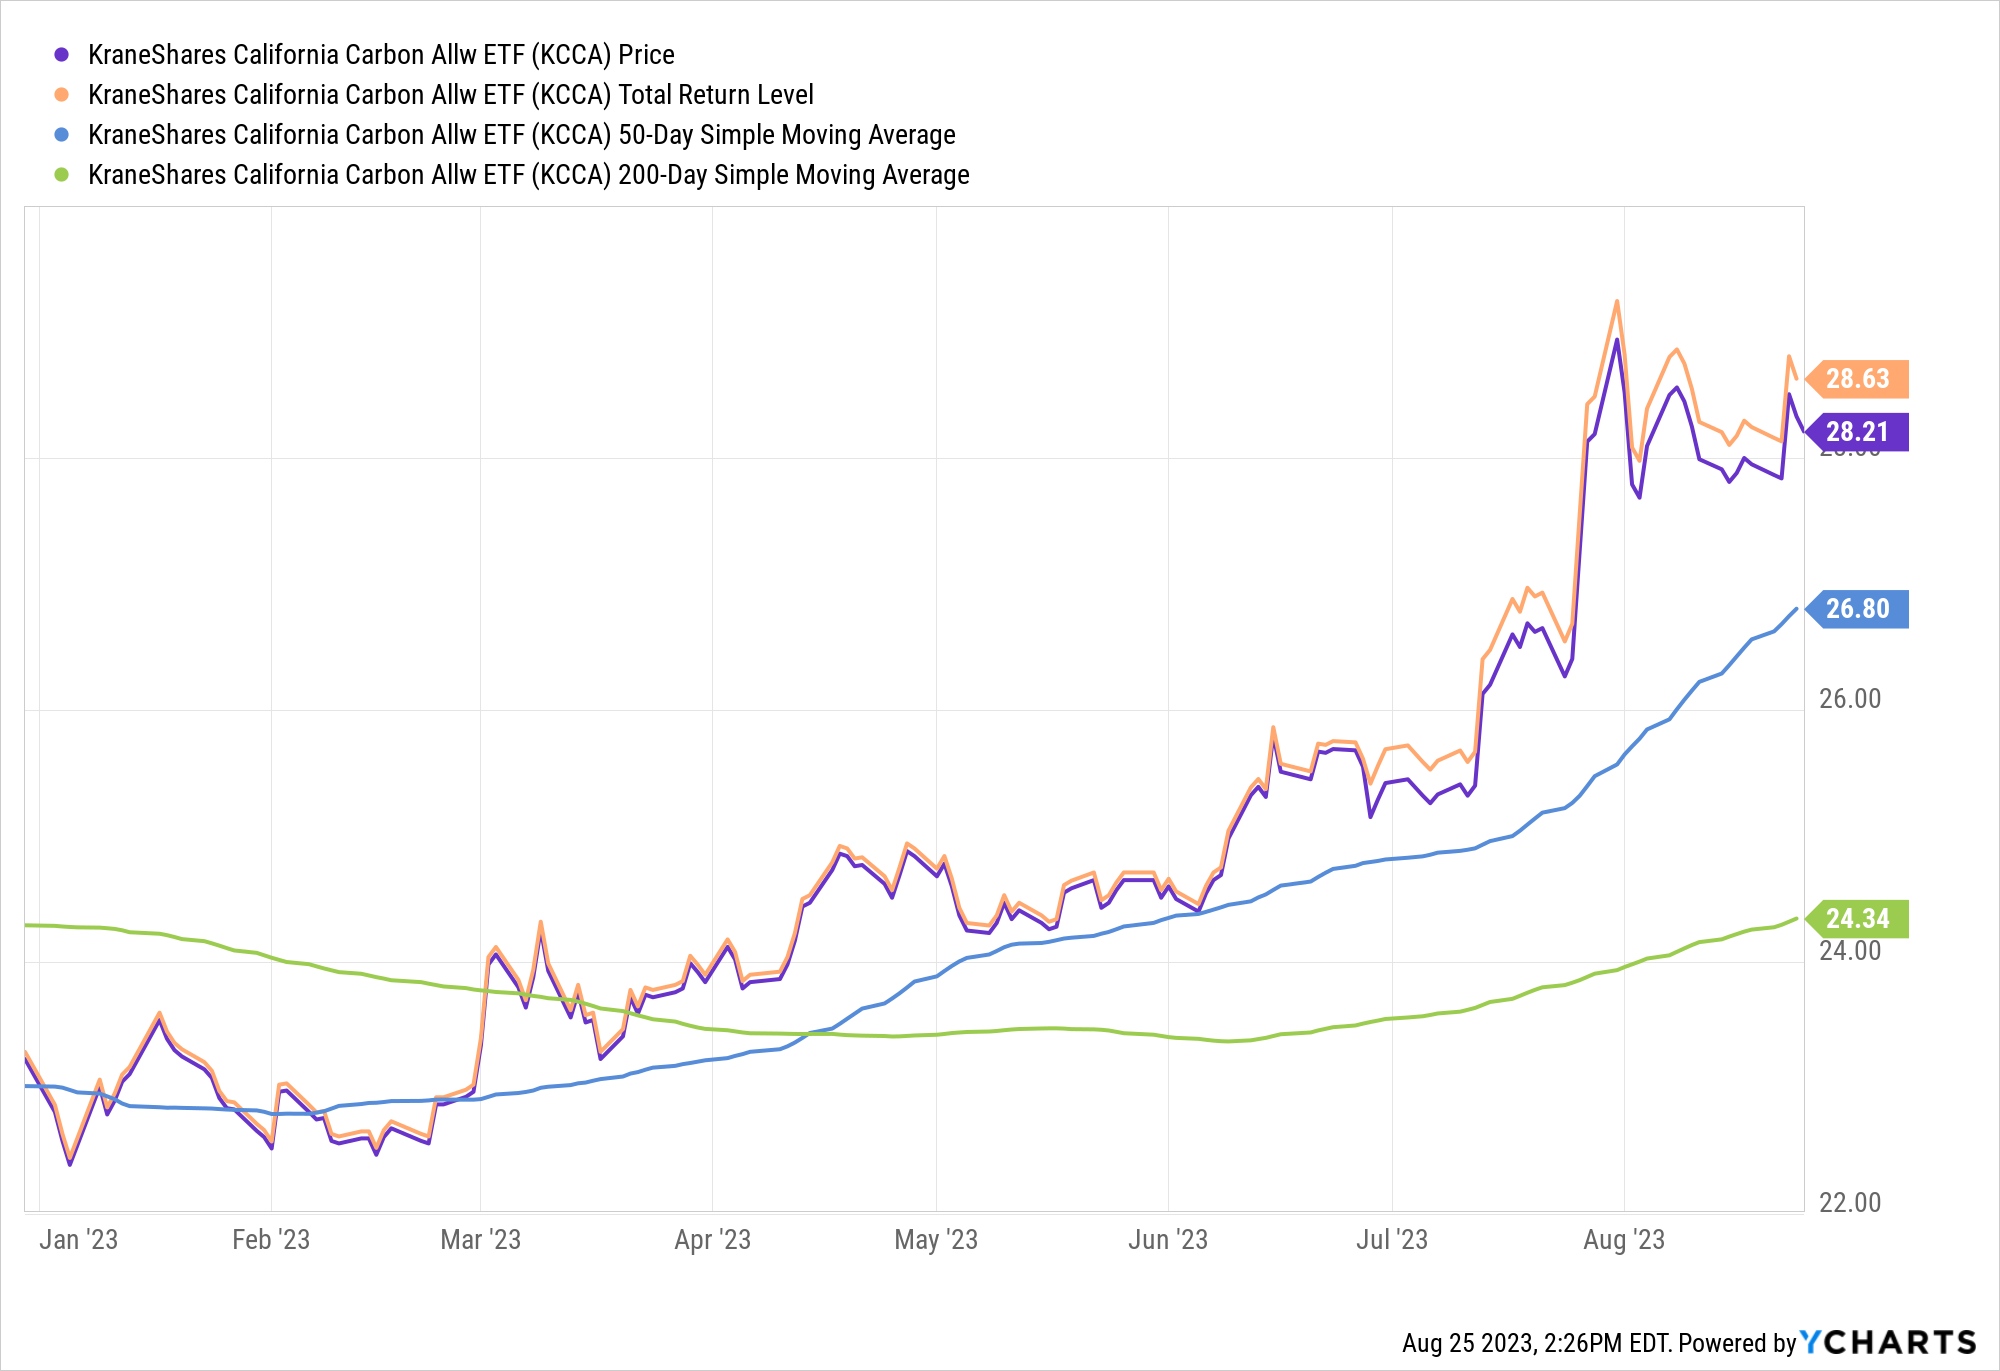 Graph of KCCA's total returns and price returns YTD, as well as the fund's significant outperformance above both it's 50-day SMA and 200-day SMA. 